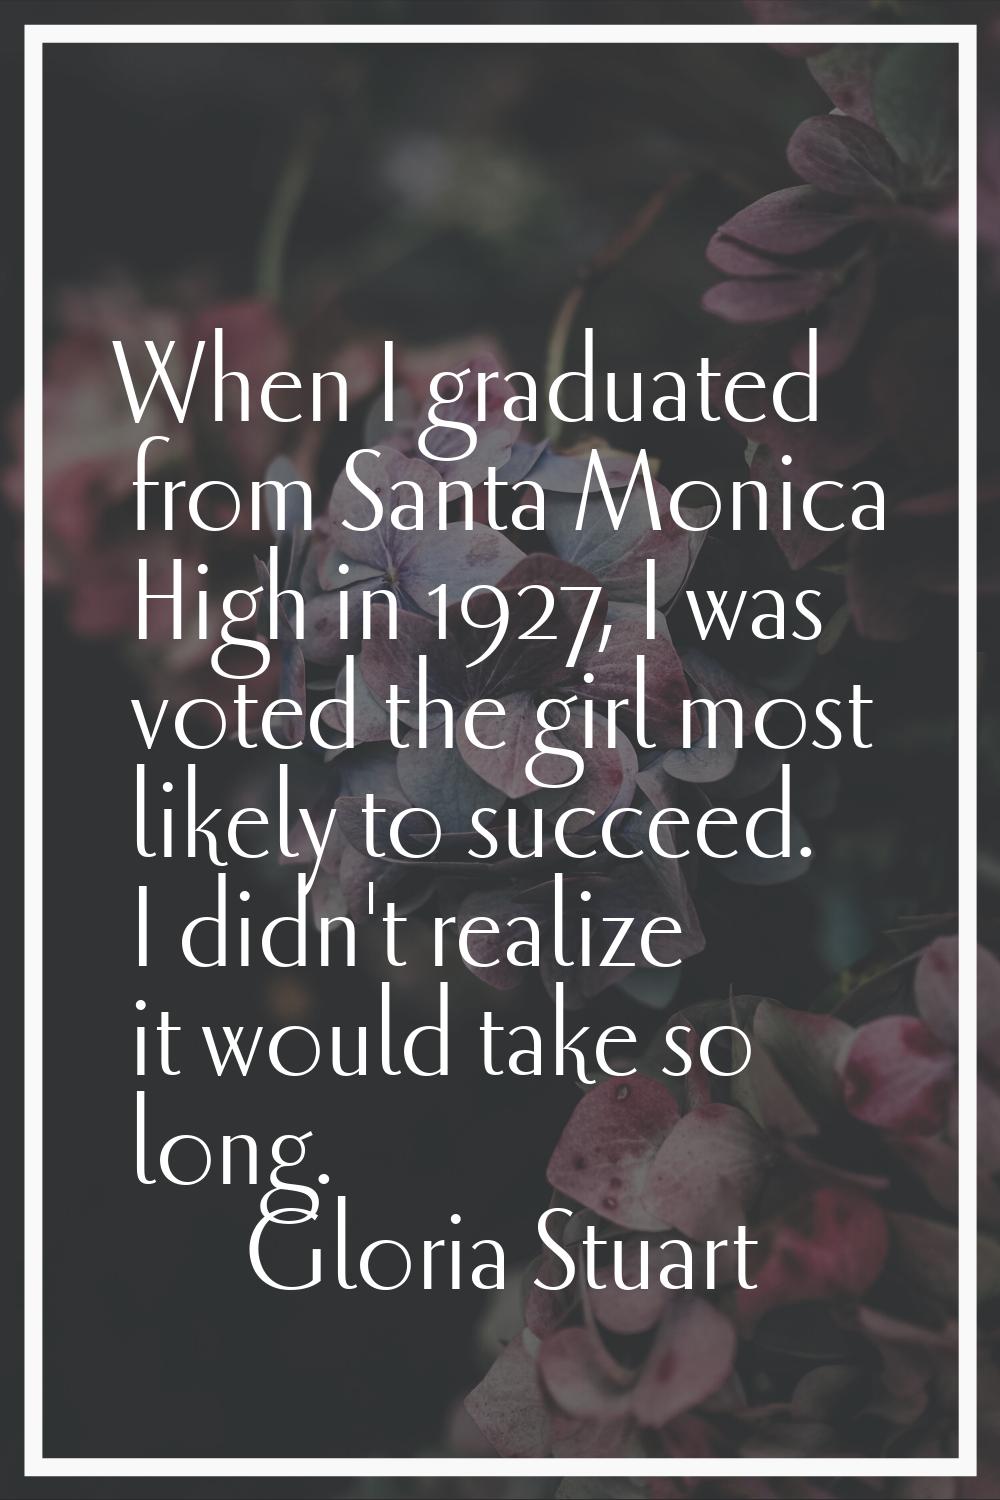 When I graduated from Santa Monica High in 1927, I was voted the girl most likely to succeed. I did